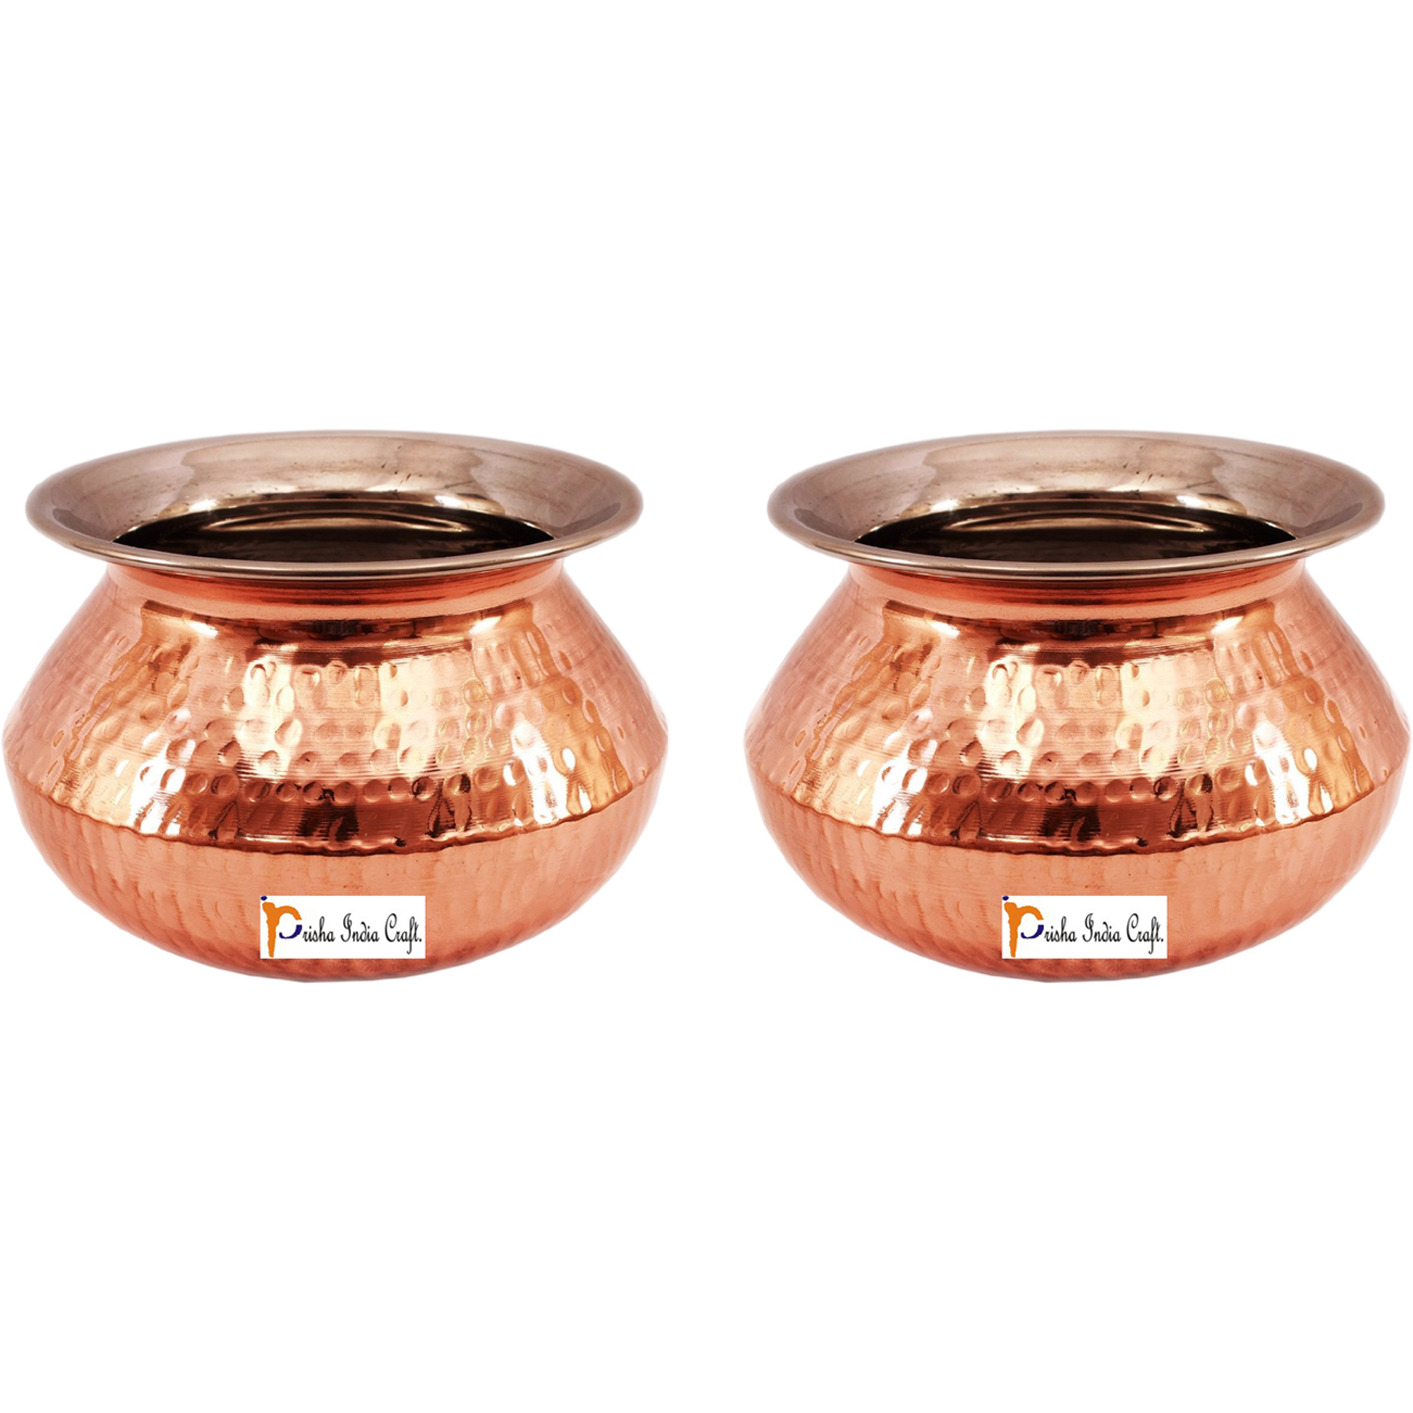 Set of 2 Prisha India Craft B. High Quality Handmade Steel Copper Casserole and Serving Spoon - Set of Copper Handi and Serving Spoon - Copper Bowl Dia - 5  X Height - 3.25  - Christmas Gift